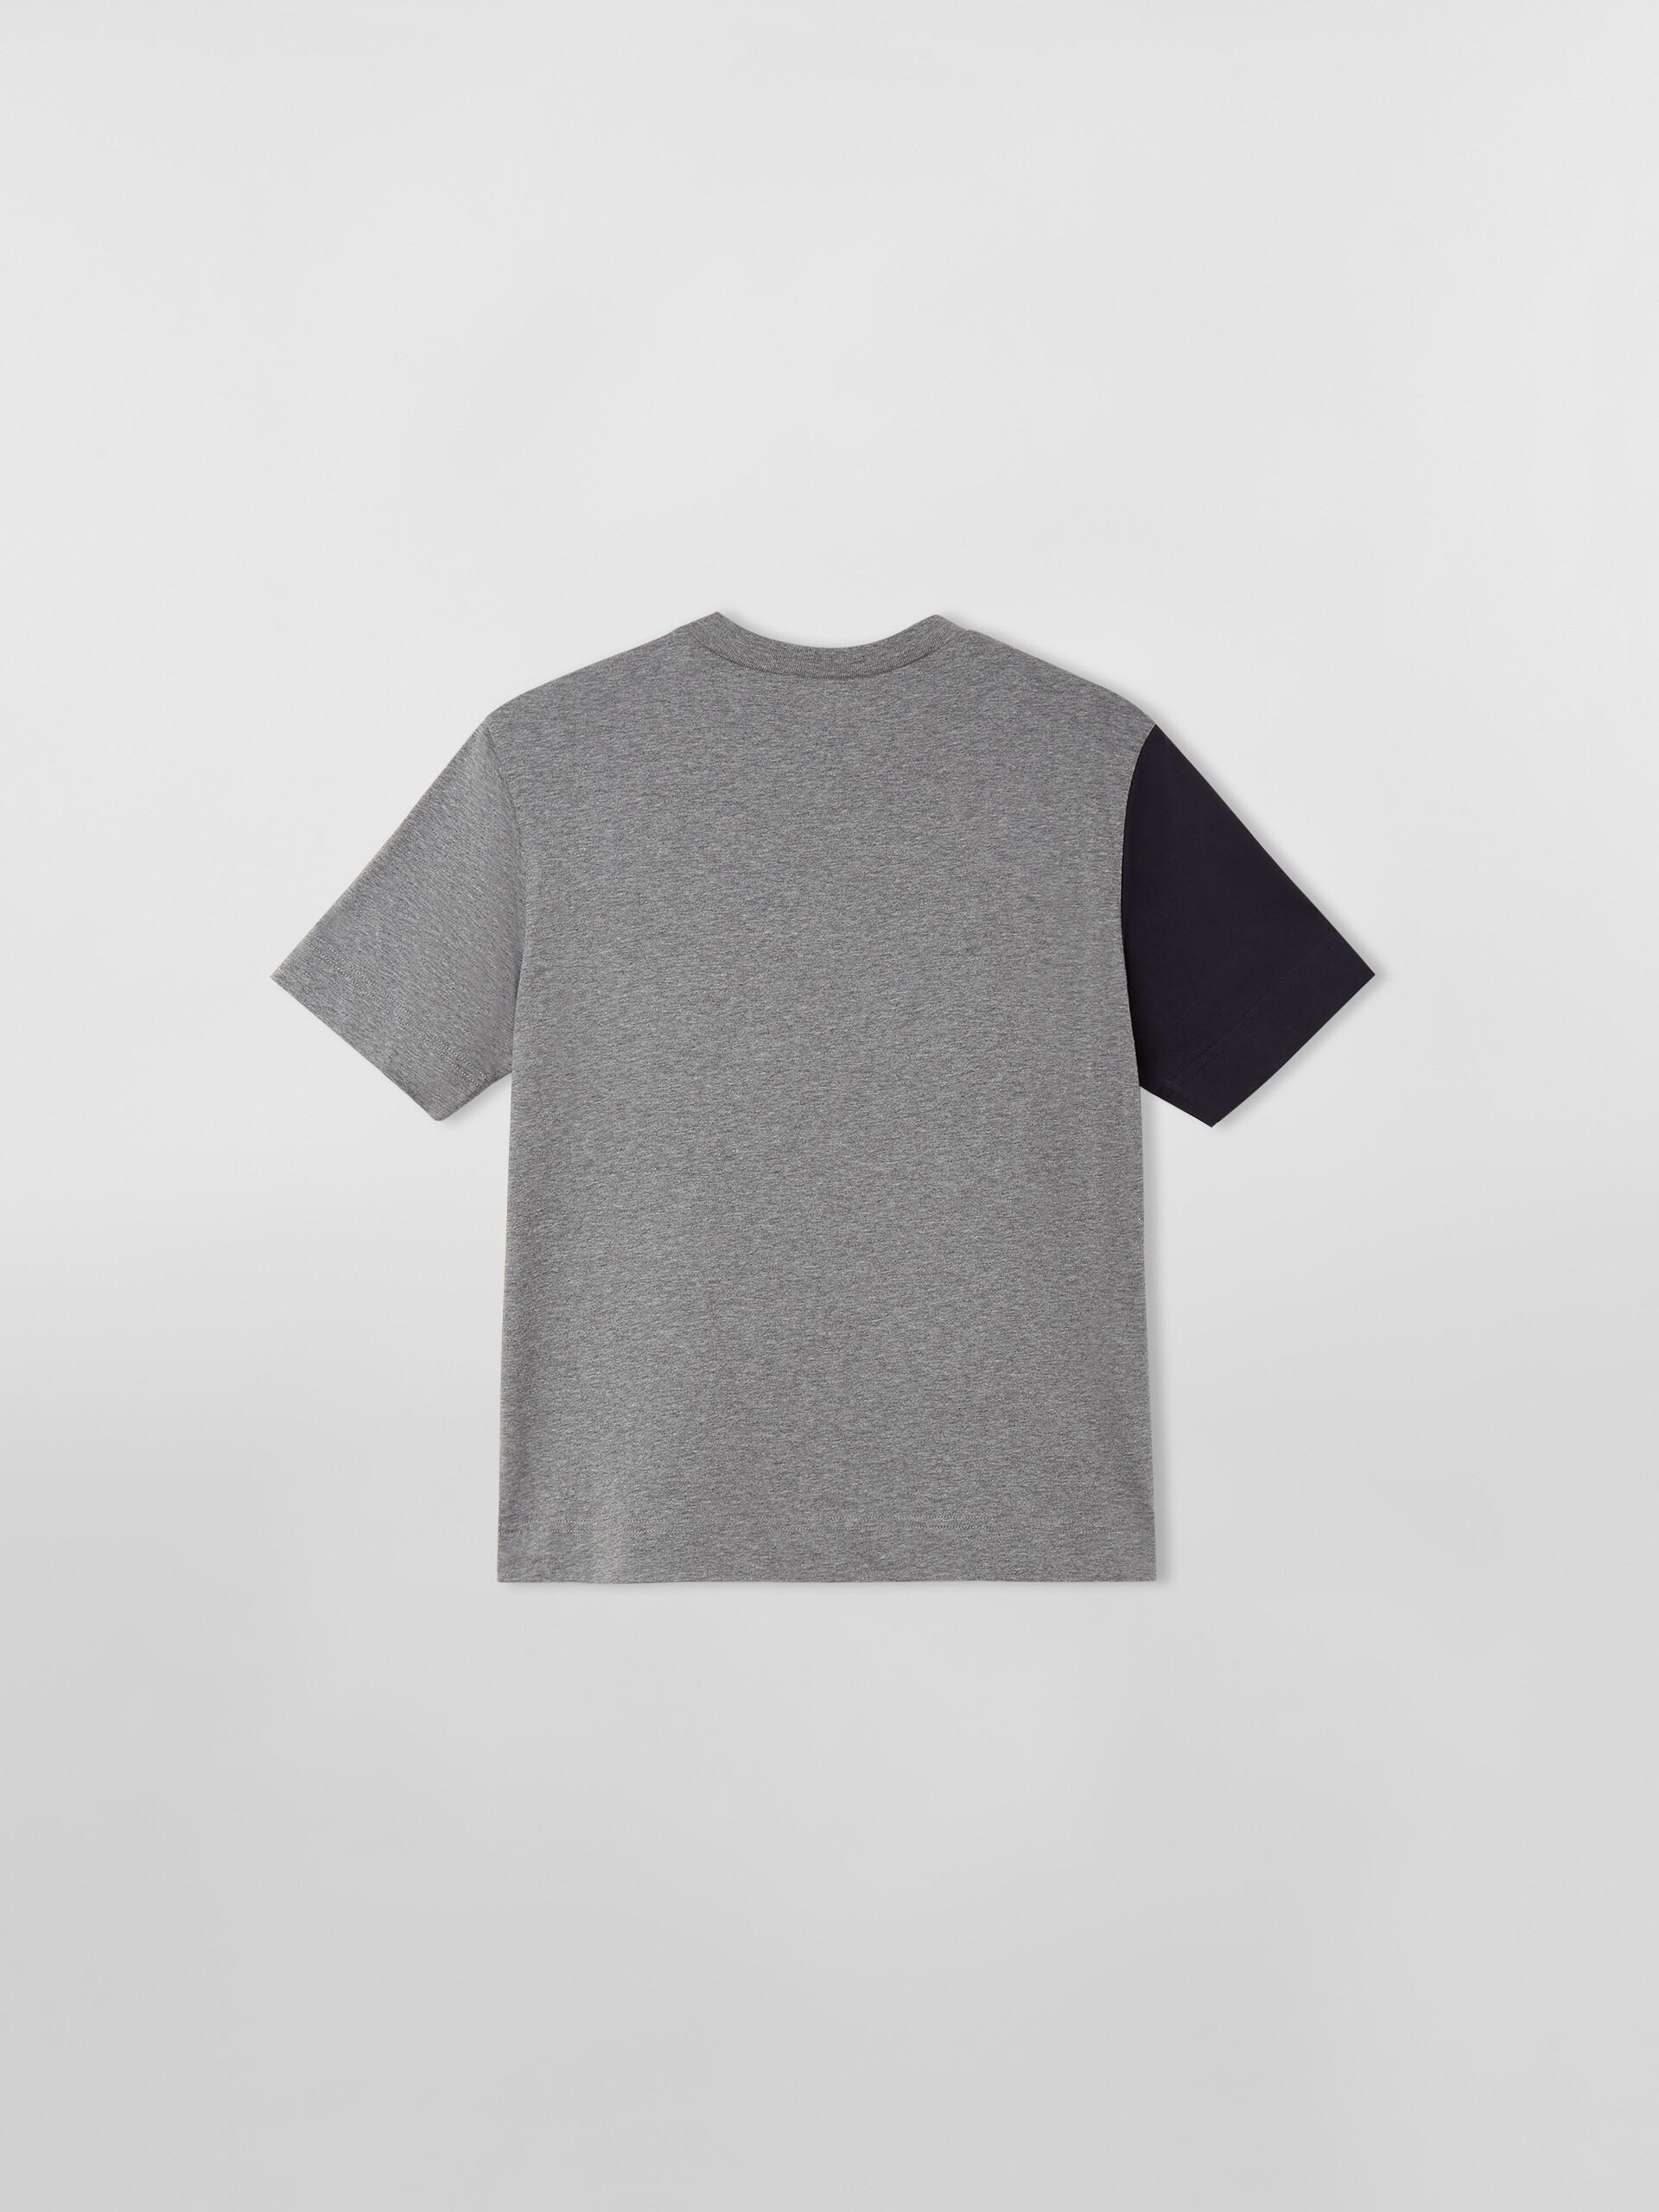 BICOLOR T-SHIRT WITH BIG "M" ON THE FRONT - T-shirts - Image 2